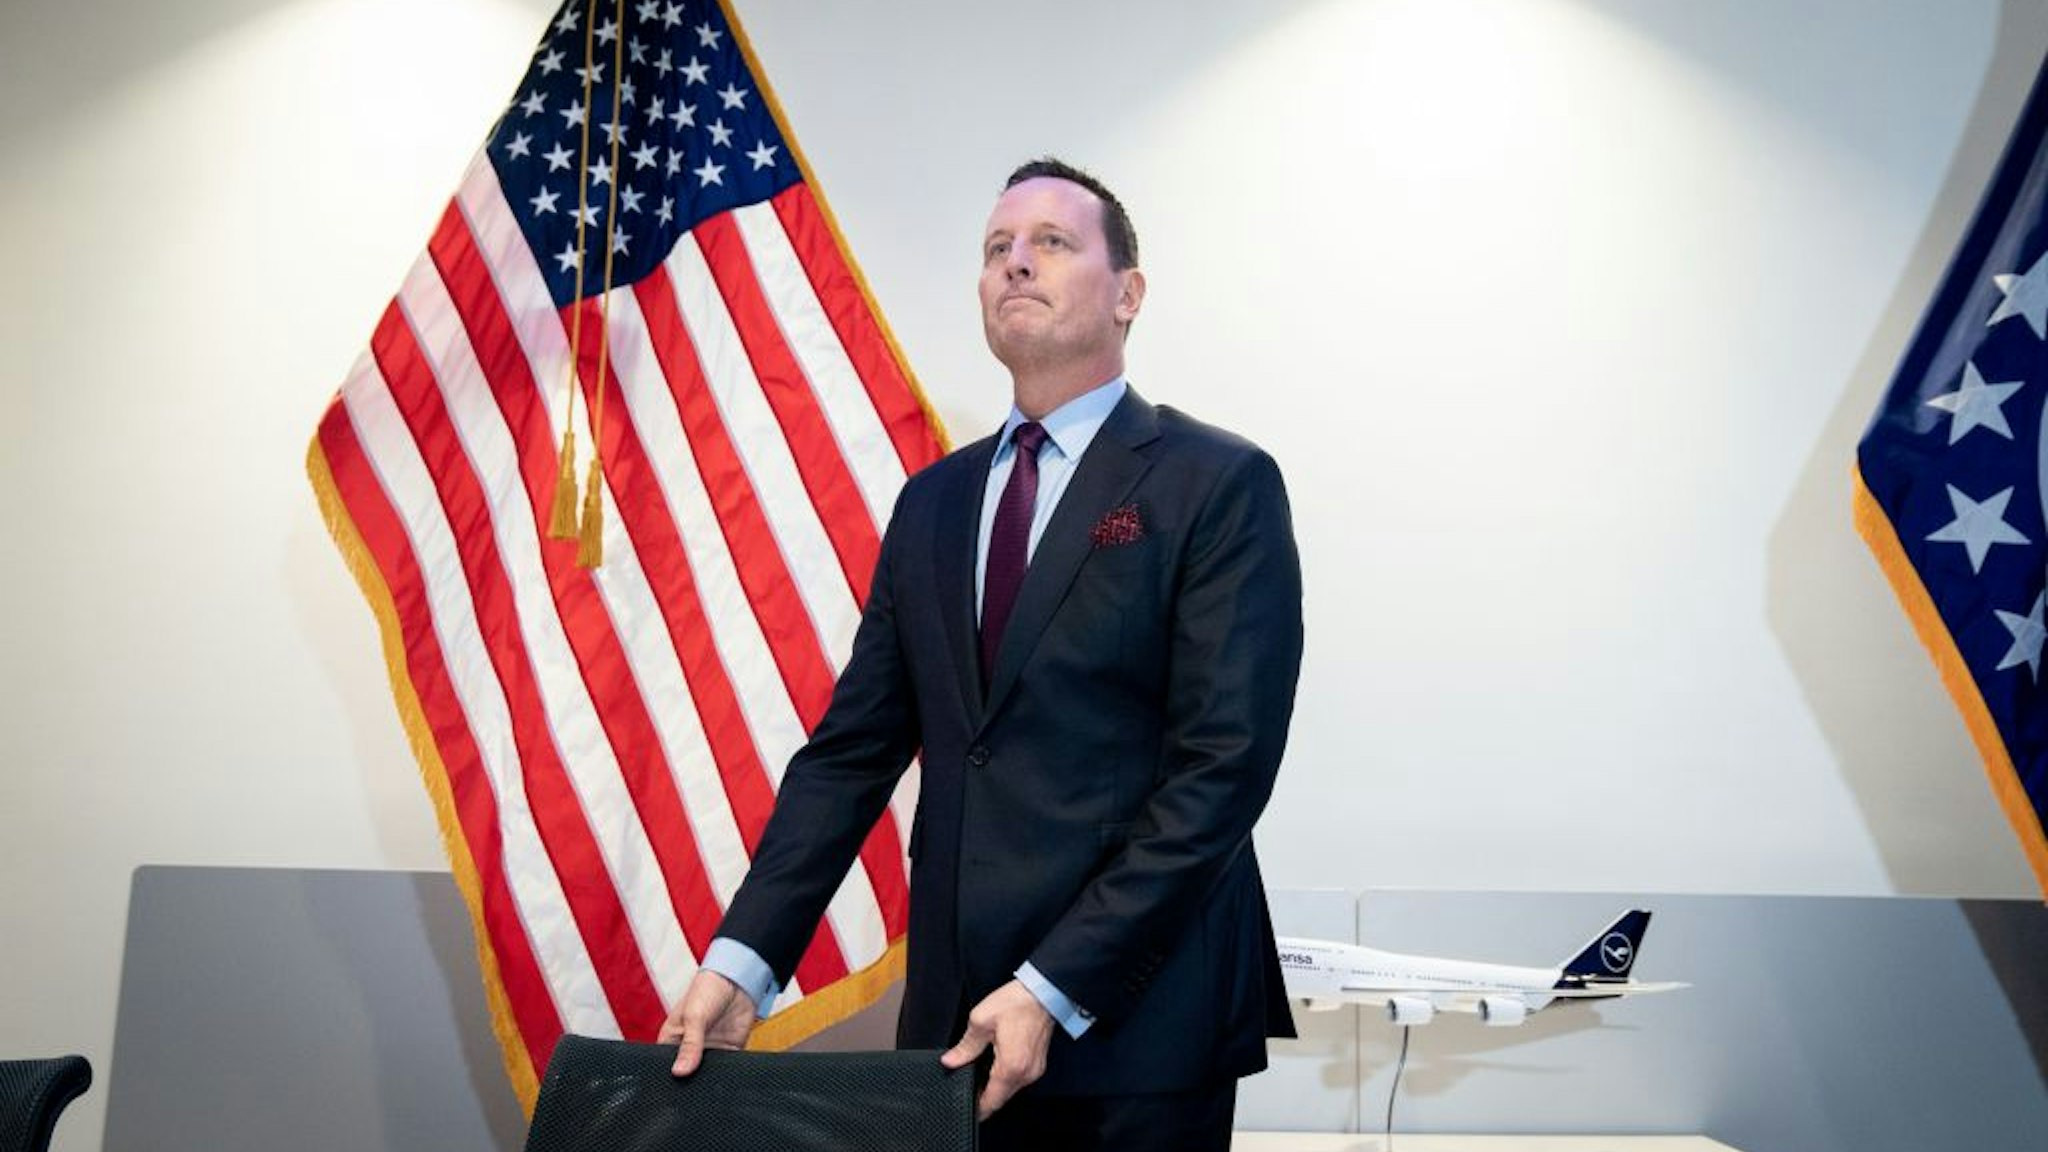 Richard Grenell, Ambassador of the United States of America to Germany, attends a press conference at the US Embassy in Berlin.